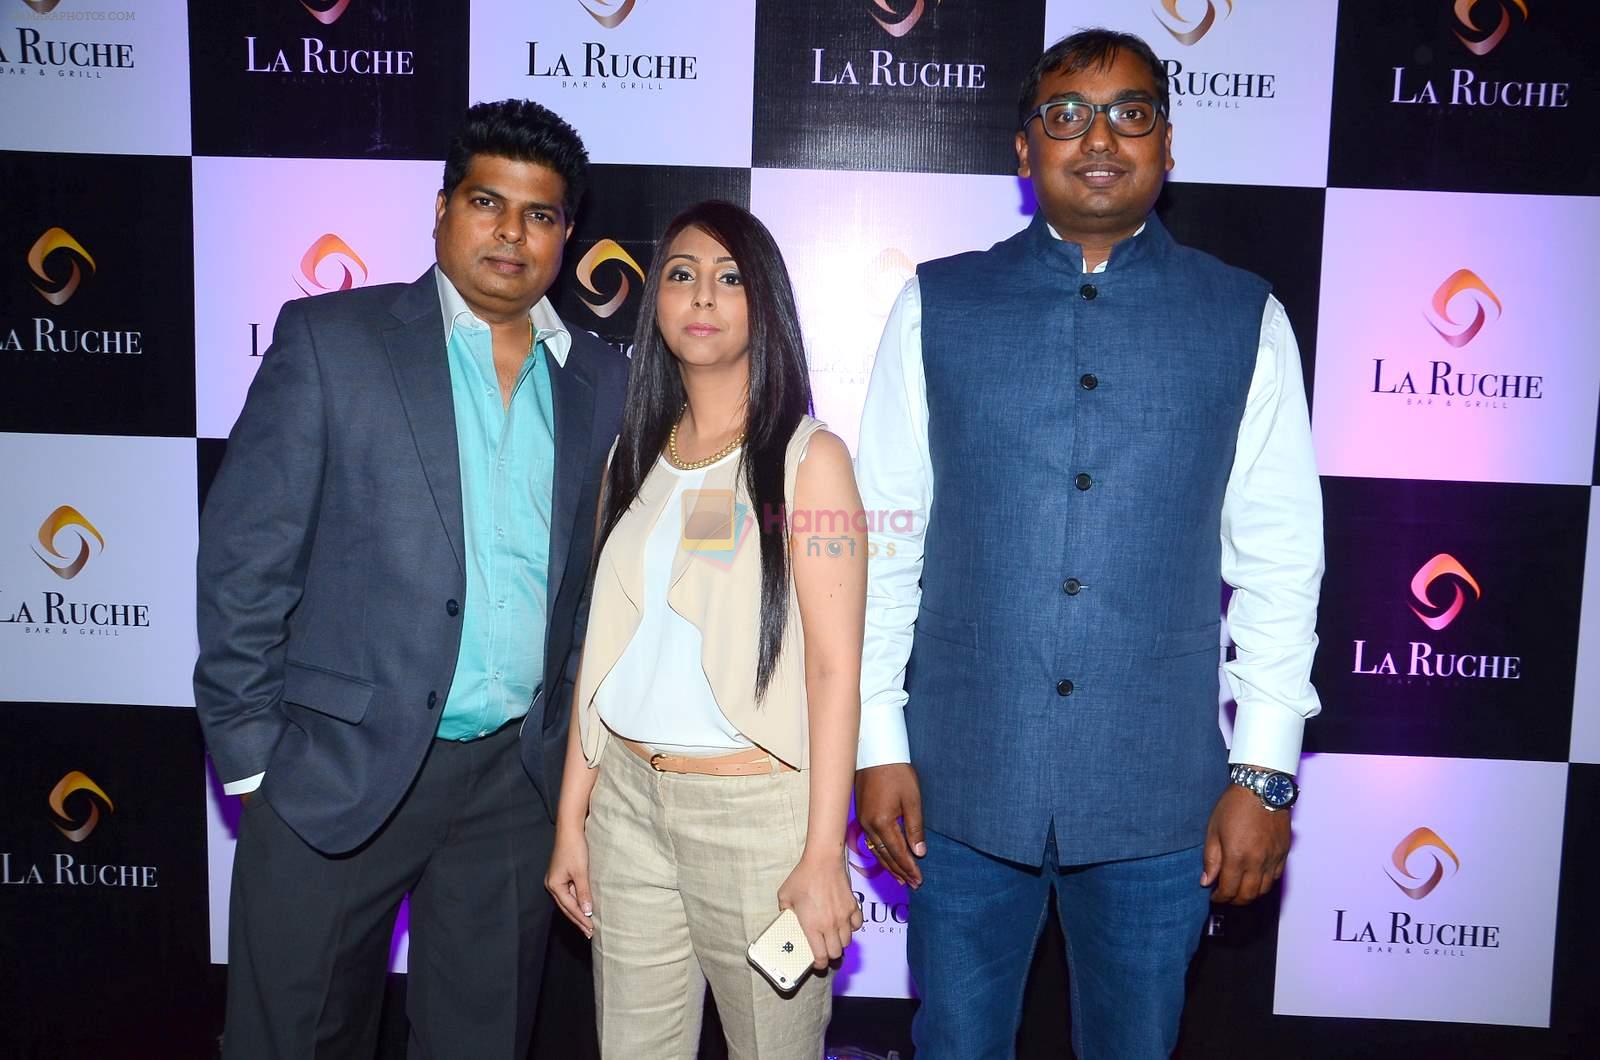 at La Ruche bar n grill launch in Bandra on 8th April 2015